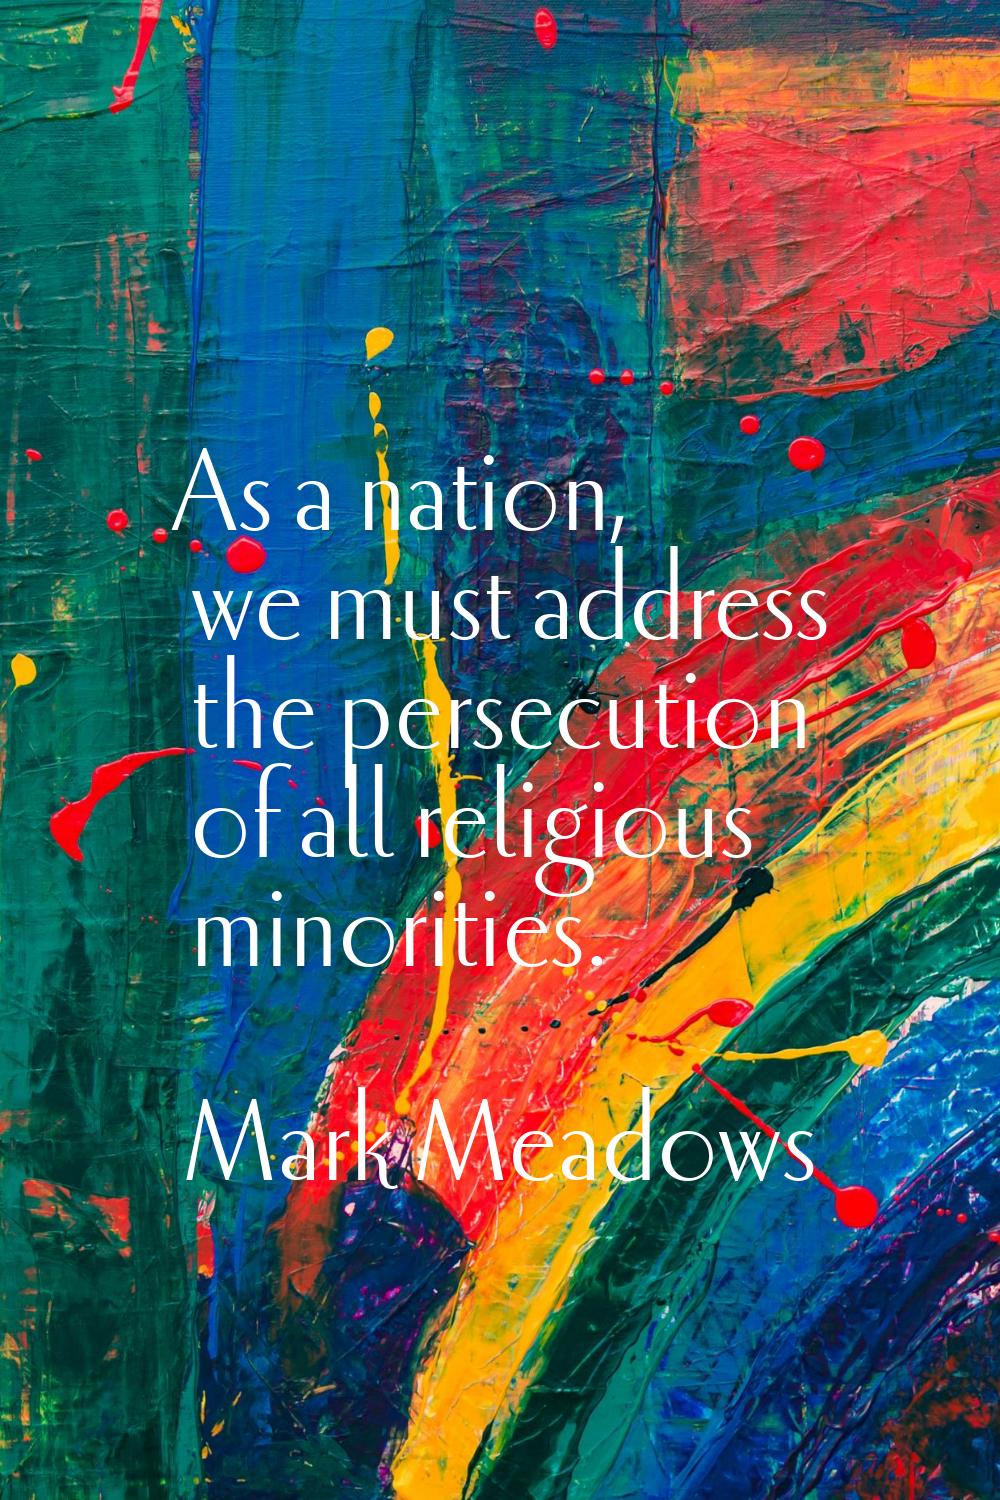 As a nation, we must address the persecution of all religious minorities.